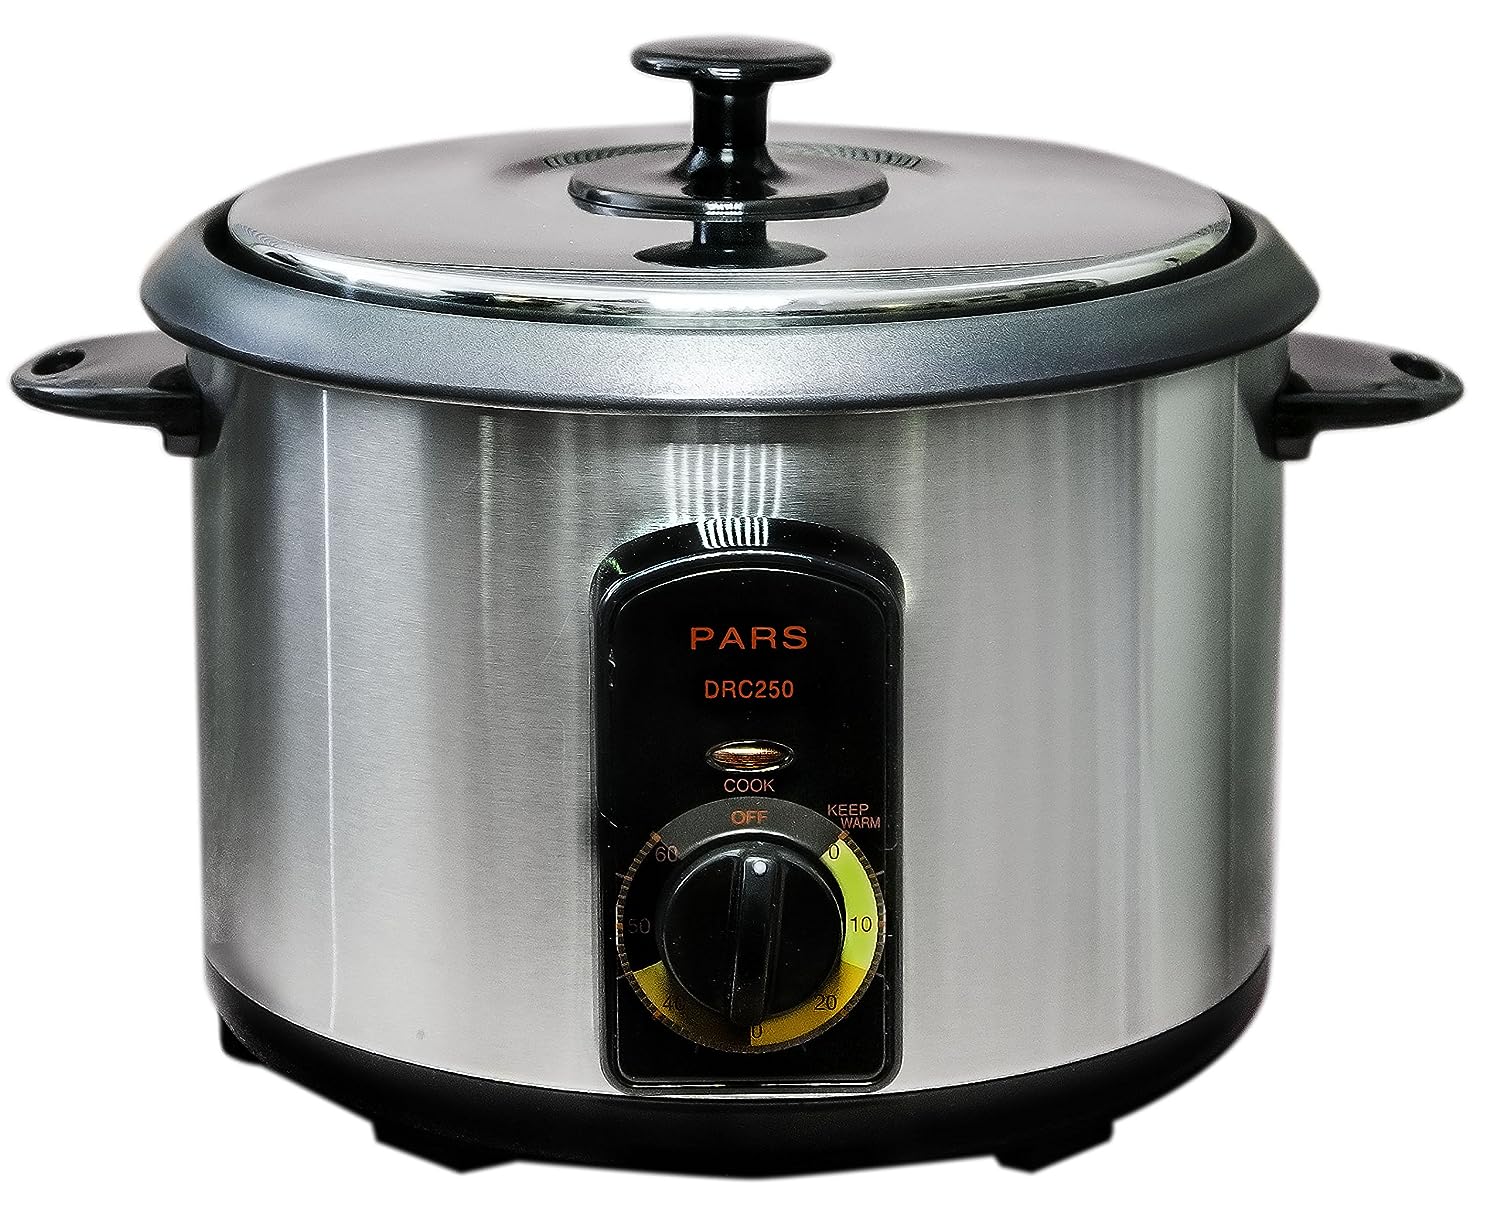  Pars Automatic Persian Rice Cooker - Tahdig Rice Maker